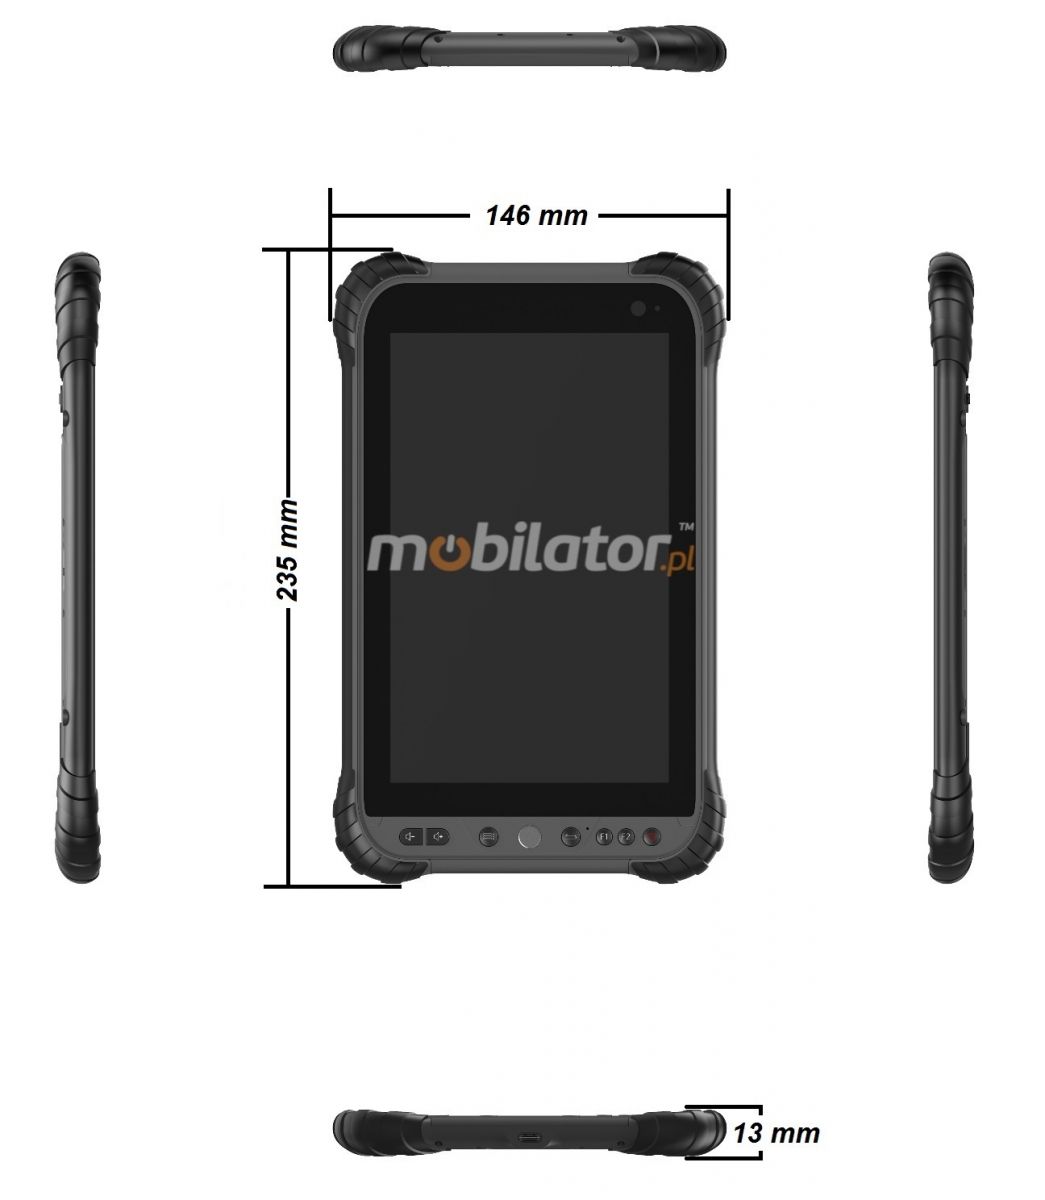 Proof rugged tablet industrial Android 8.1 MobiPad TS884 NFC 4G IP67 mobilator umpc